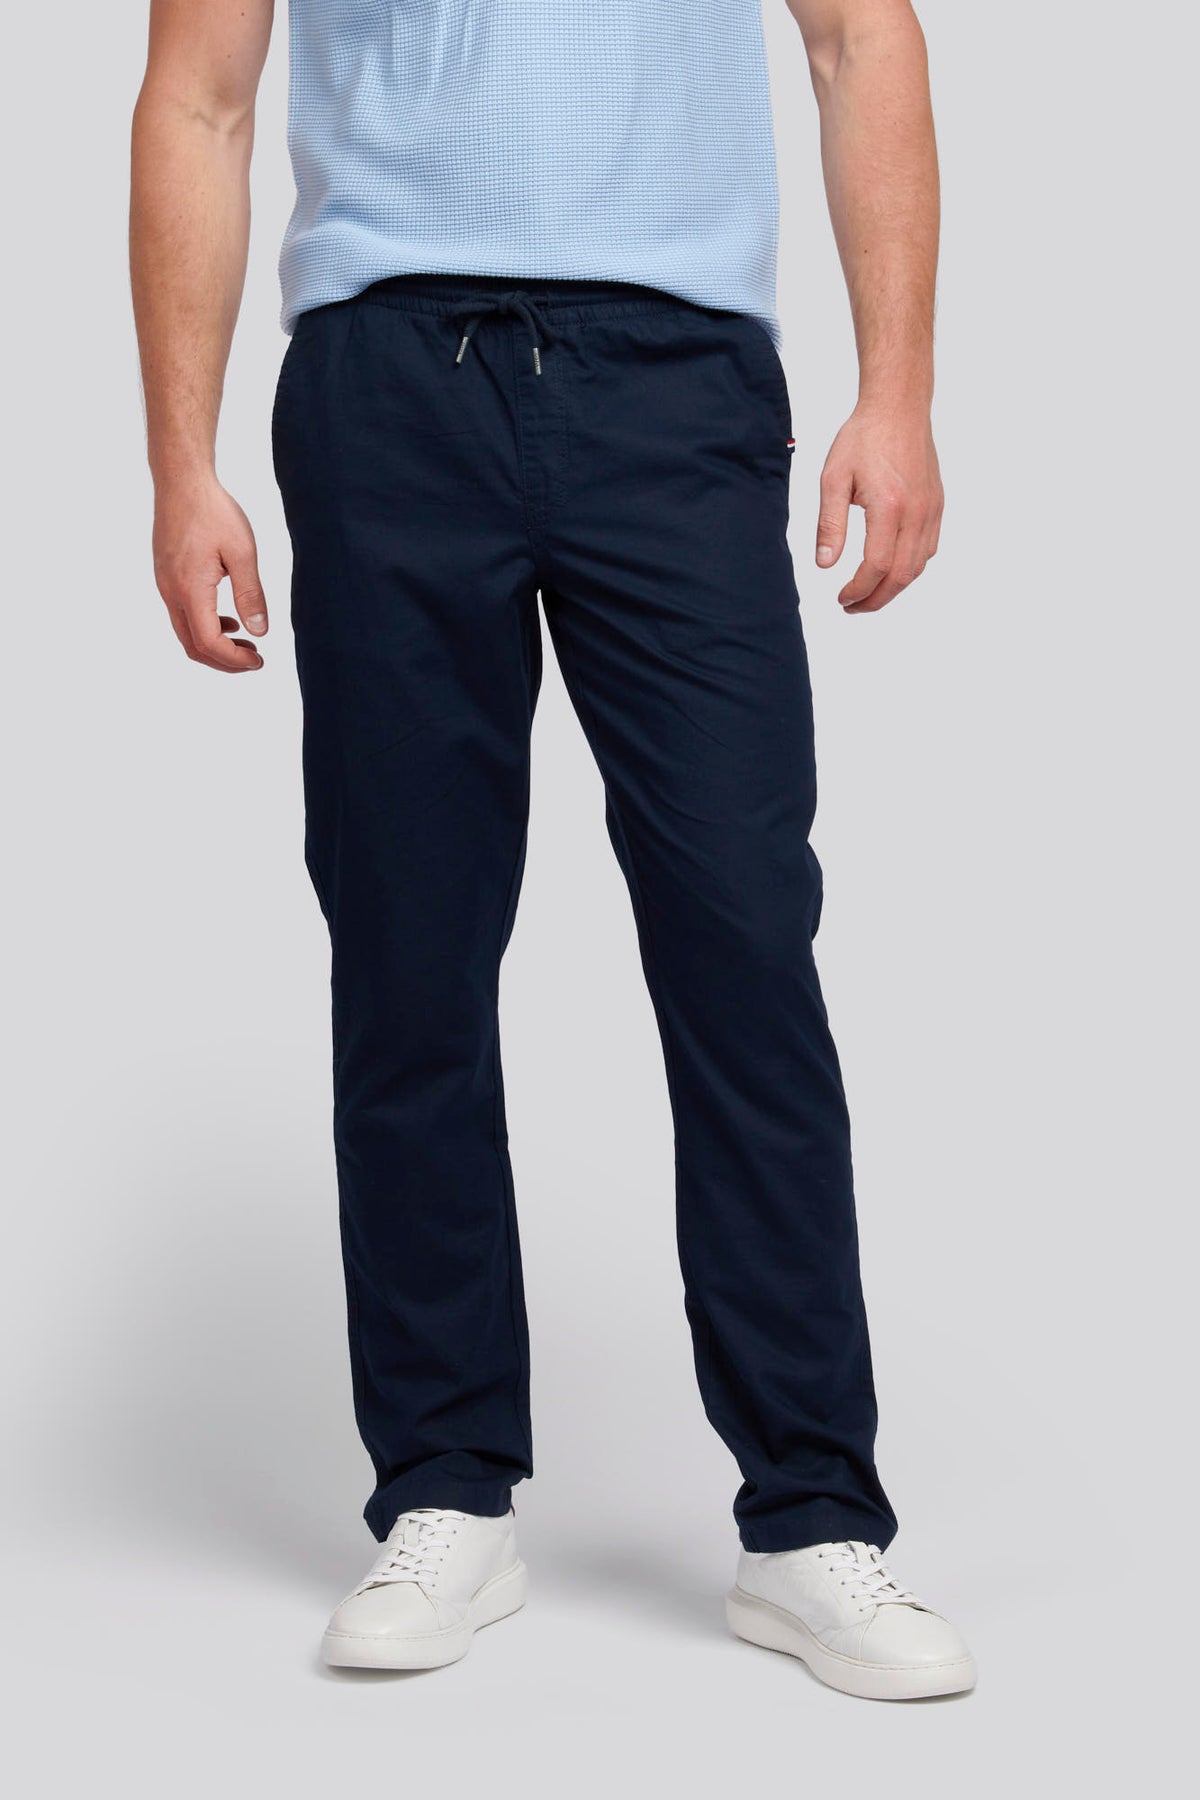 U.S. Polo Assn. Mens Trousers& Chinos Collection – U.S. Polo Assn. UK